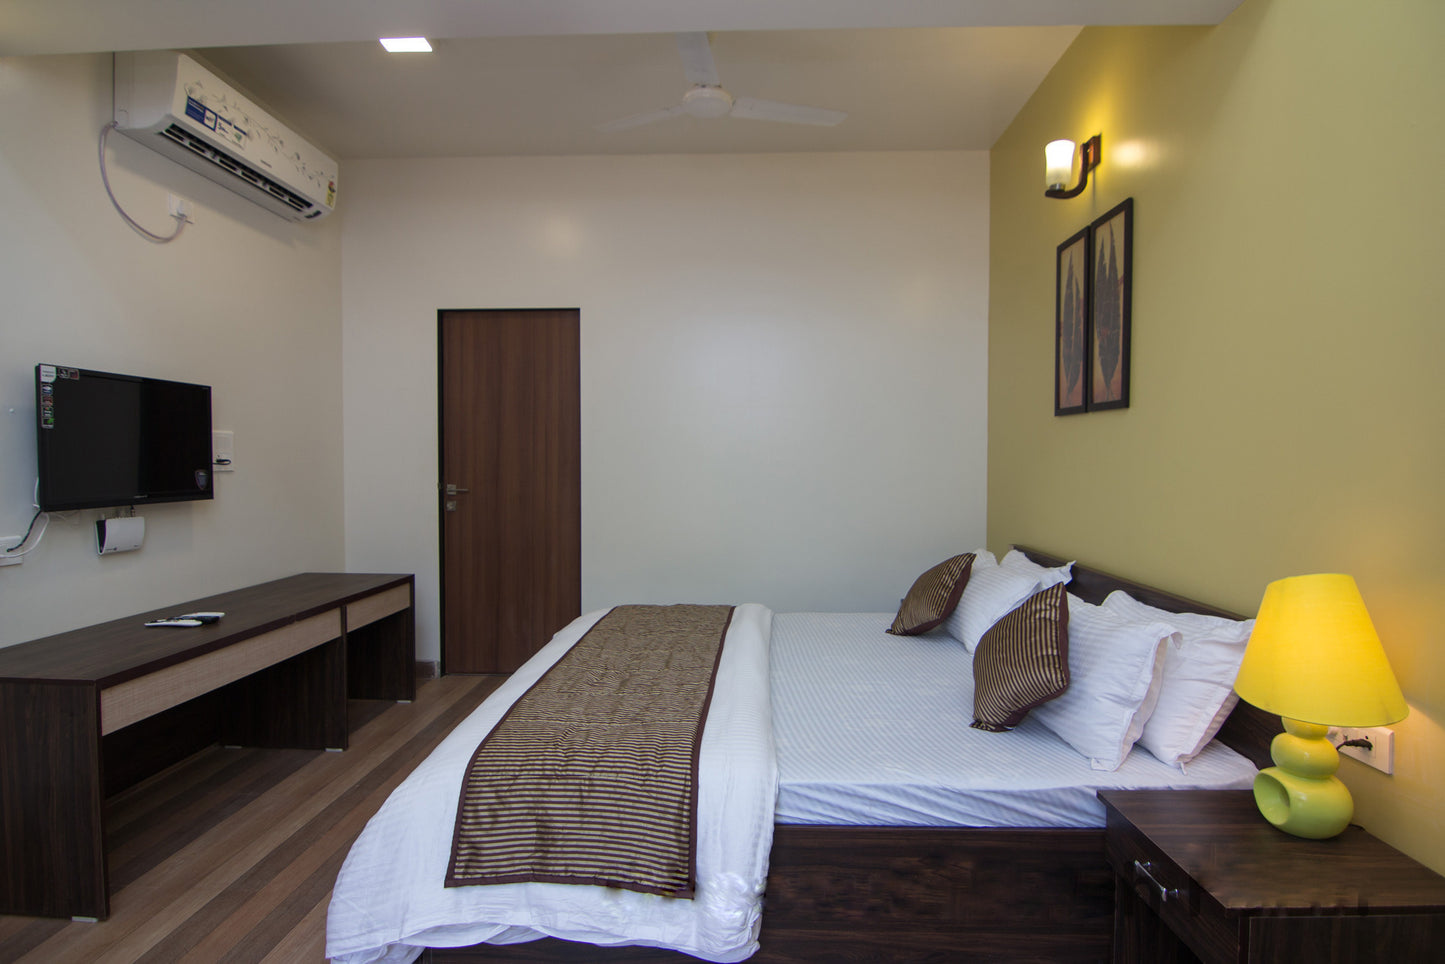 Nagaon Beach (Alibaug) : Stay in AC Deluxe Room, Jet Ski Ride, Bumper Ride, Banana Ride, Welcome drink,breakfast & MORE!